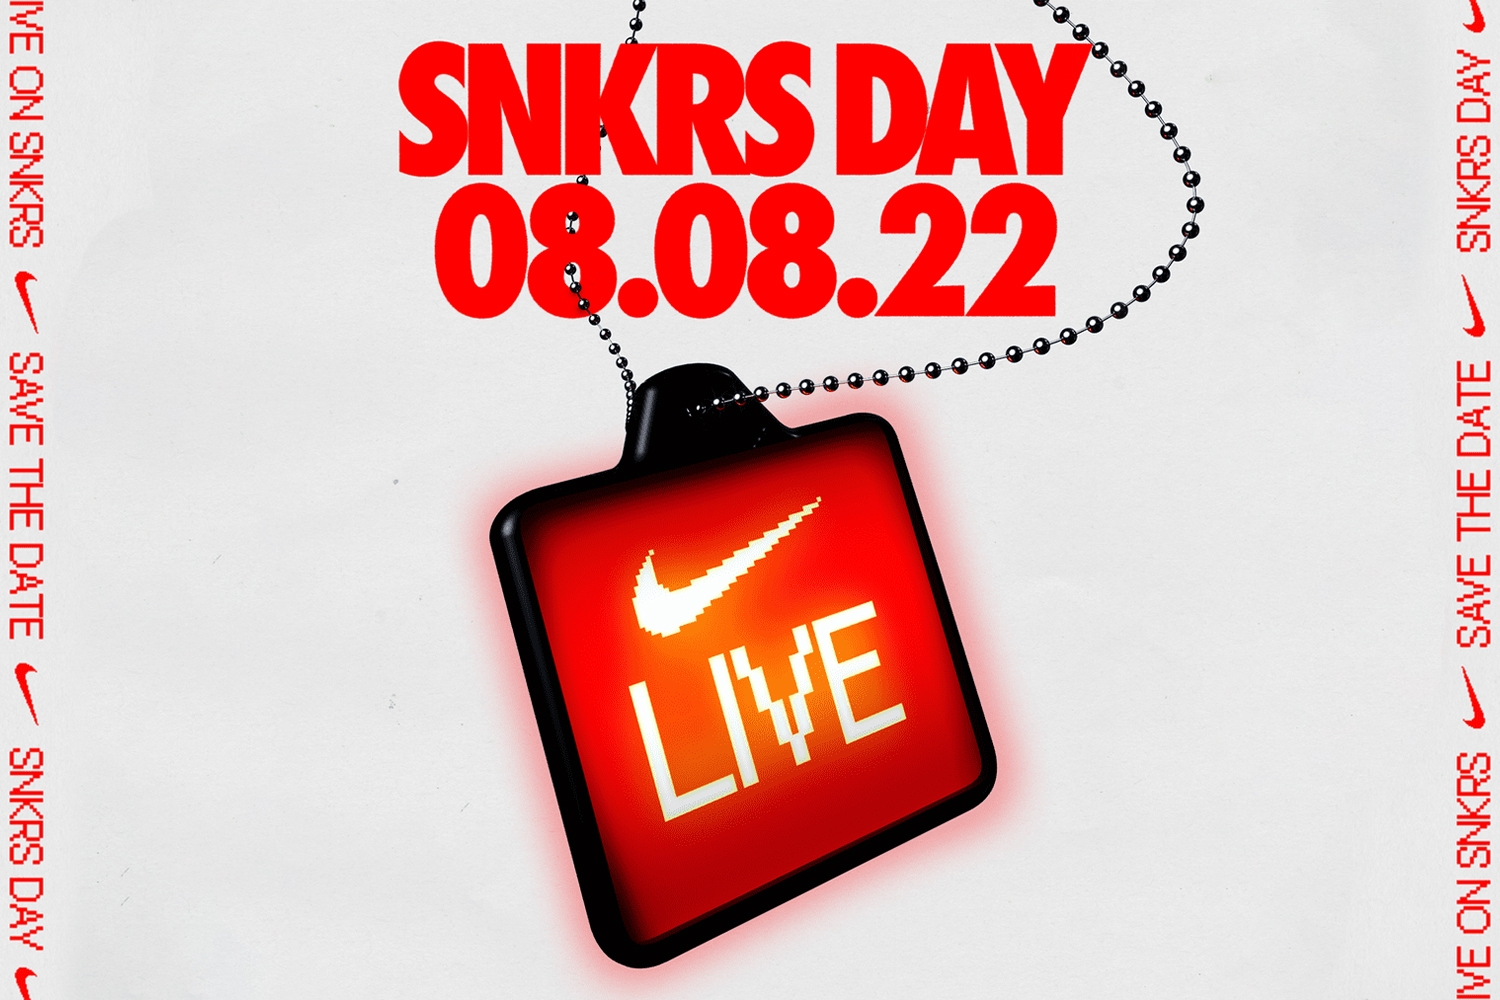 In August Nike celebrates SNKRS Day 2022